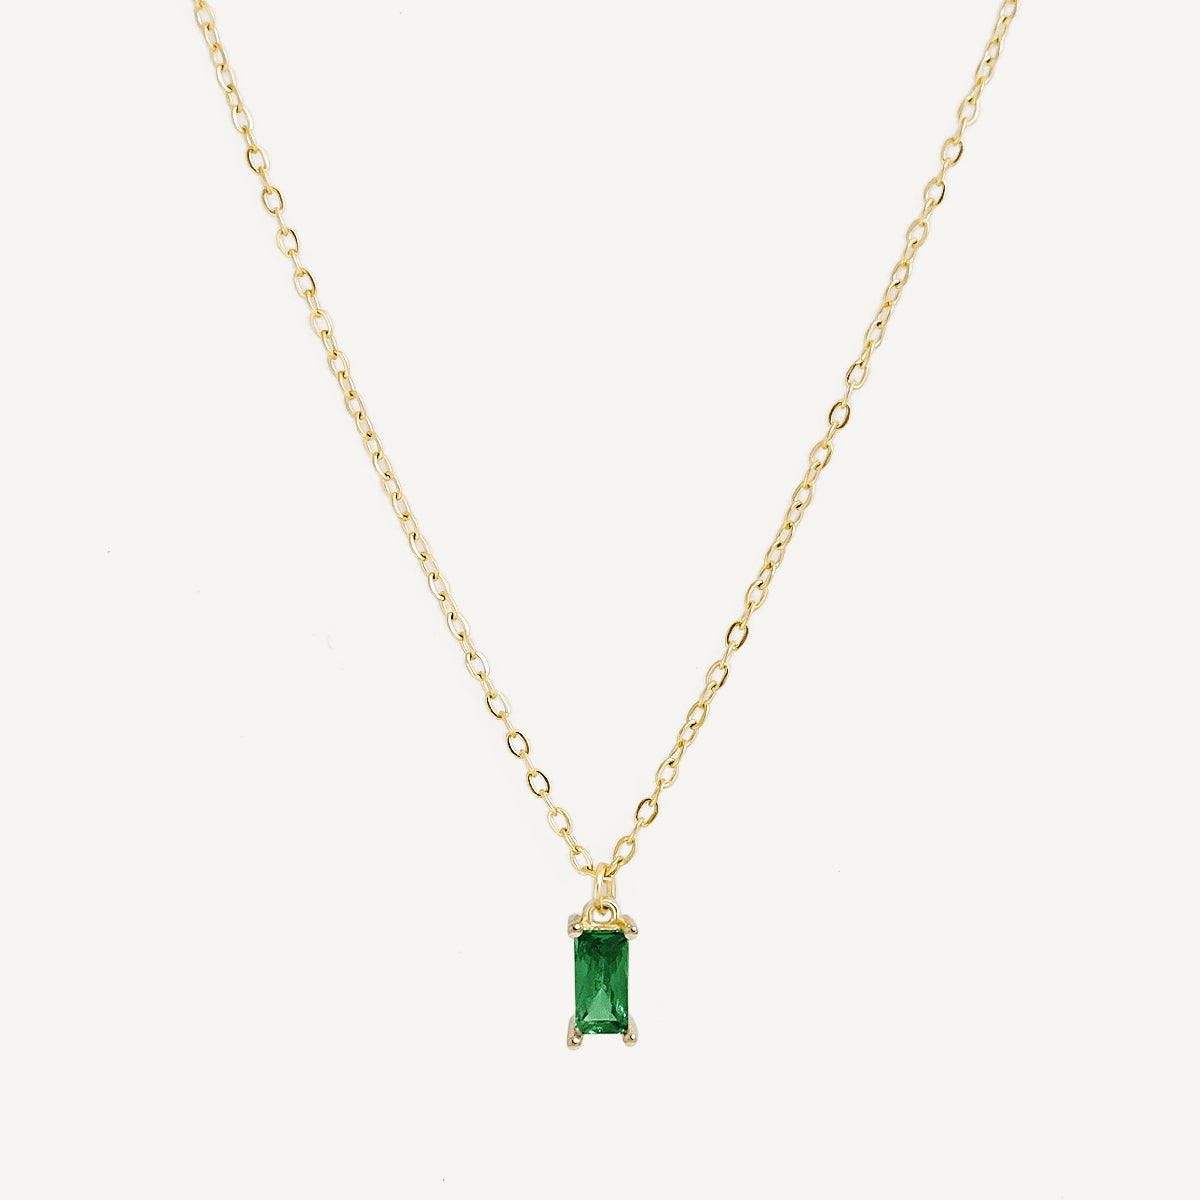 The Baguette Birthstone Necklace